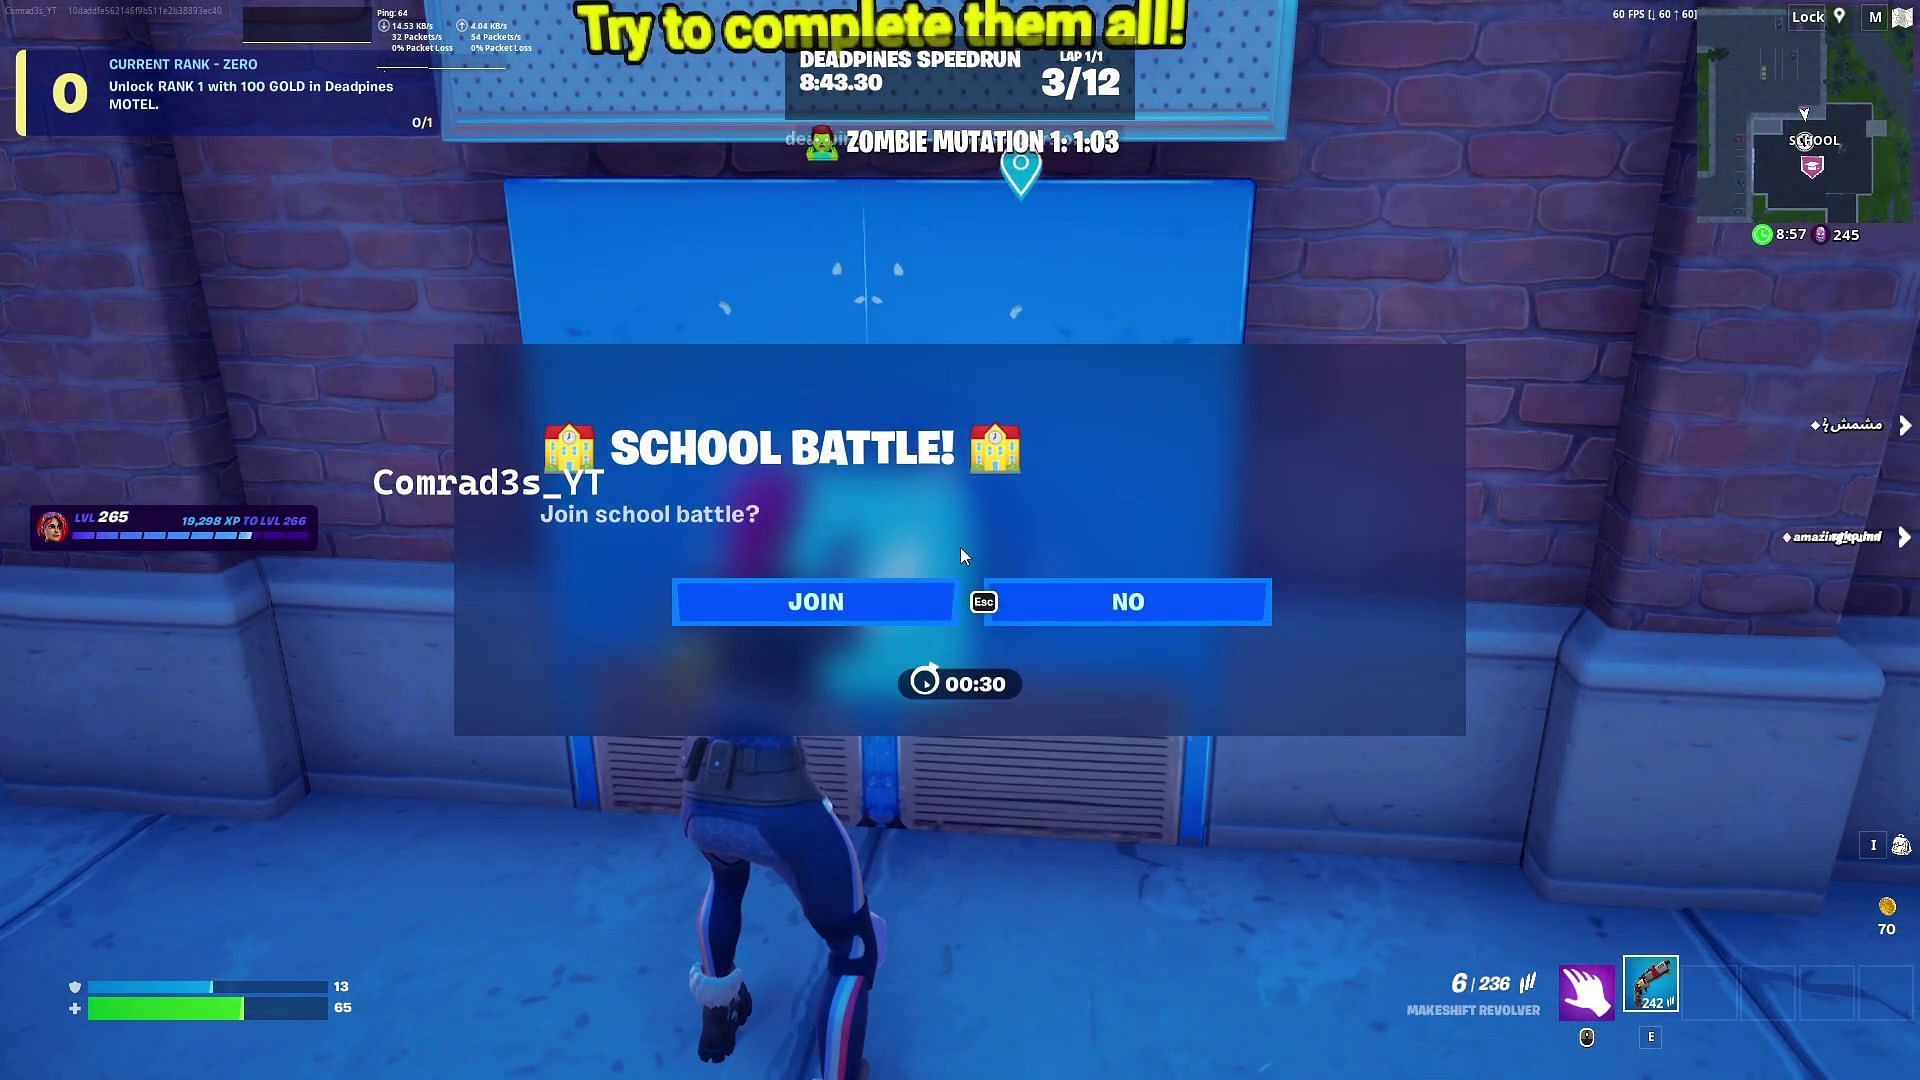 Join the school battle on the map. (Image via YouTube/Comrad3s)